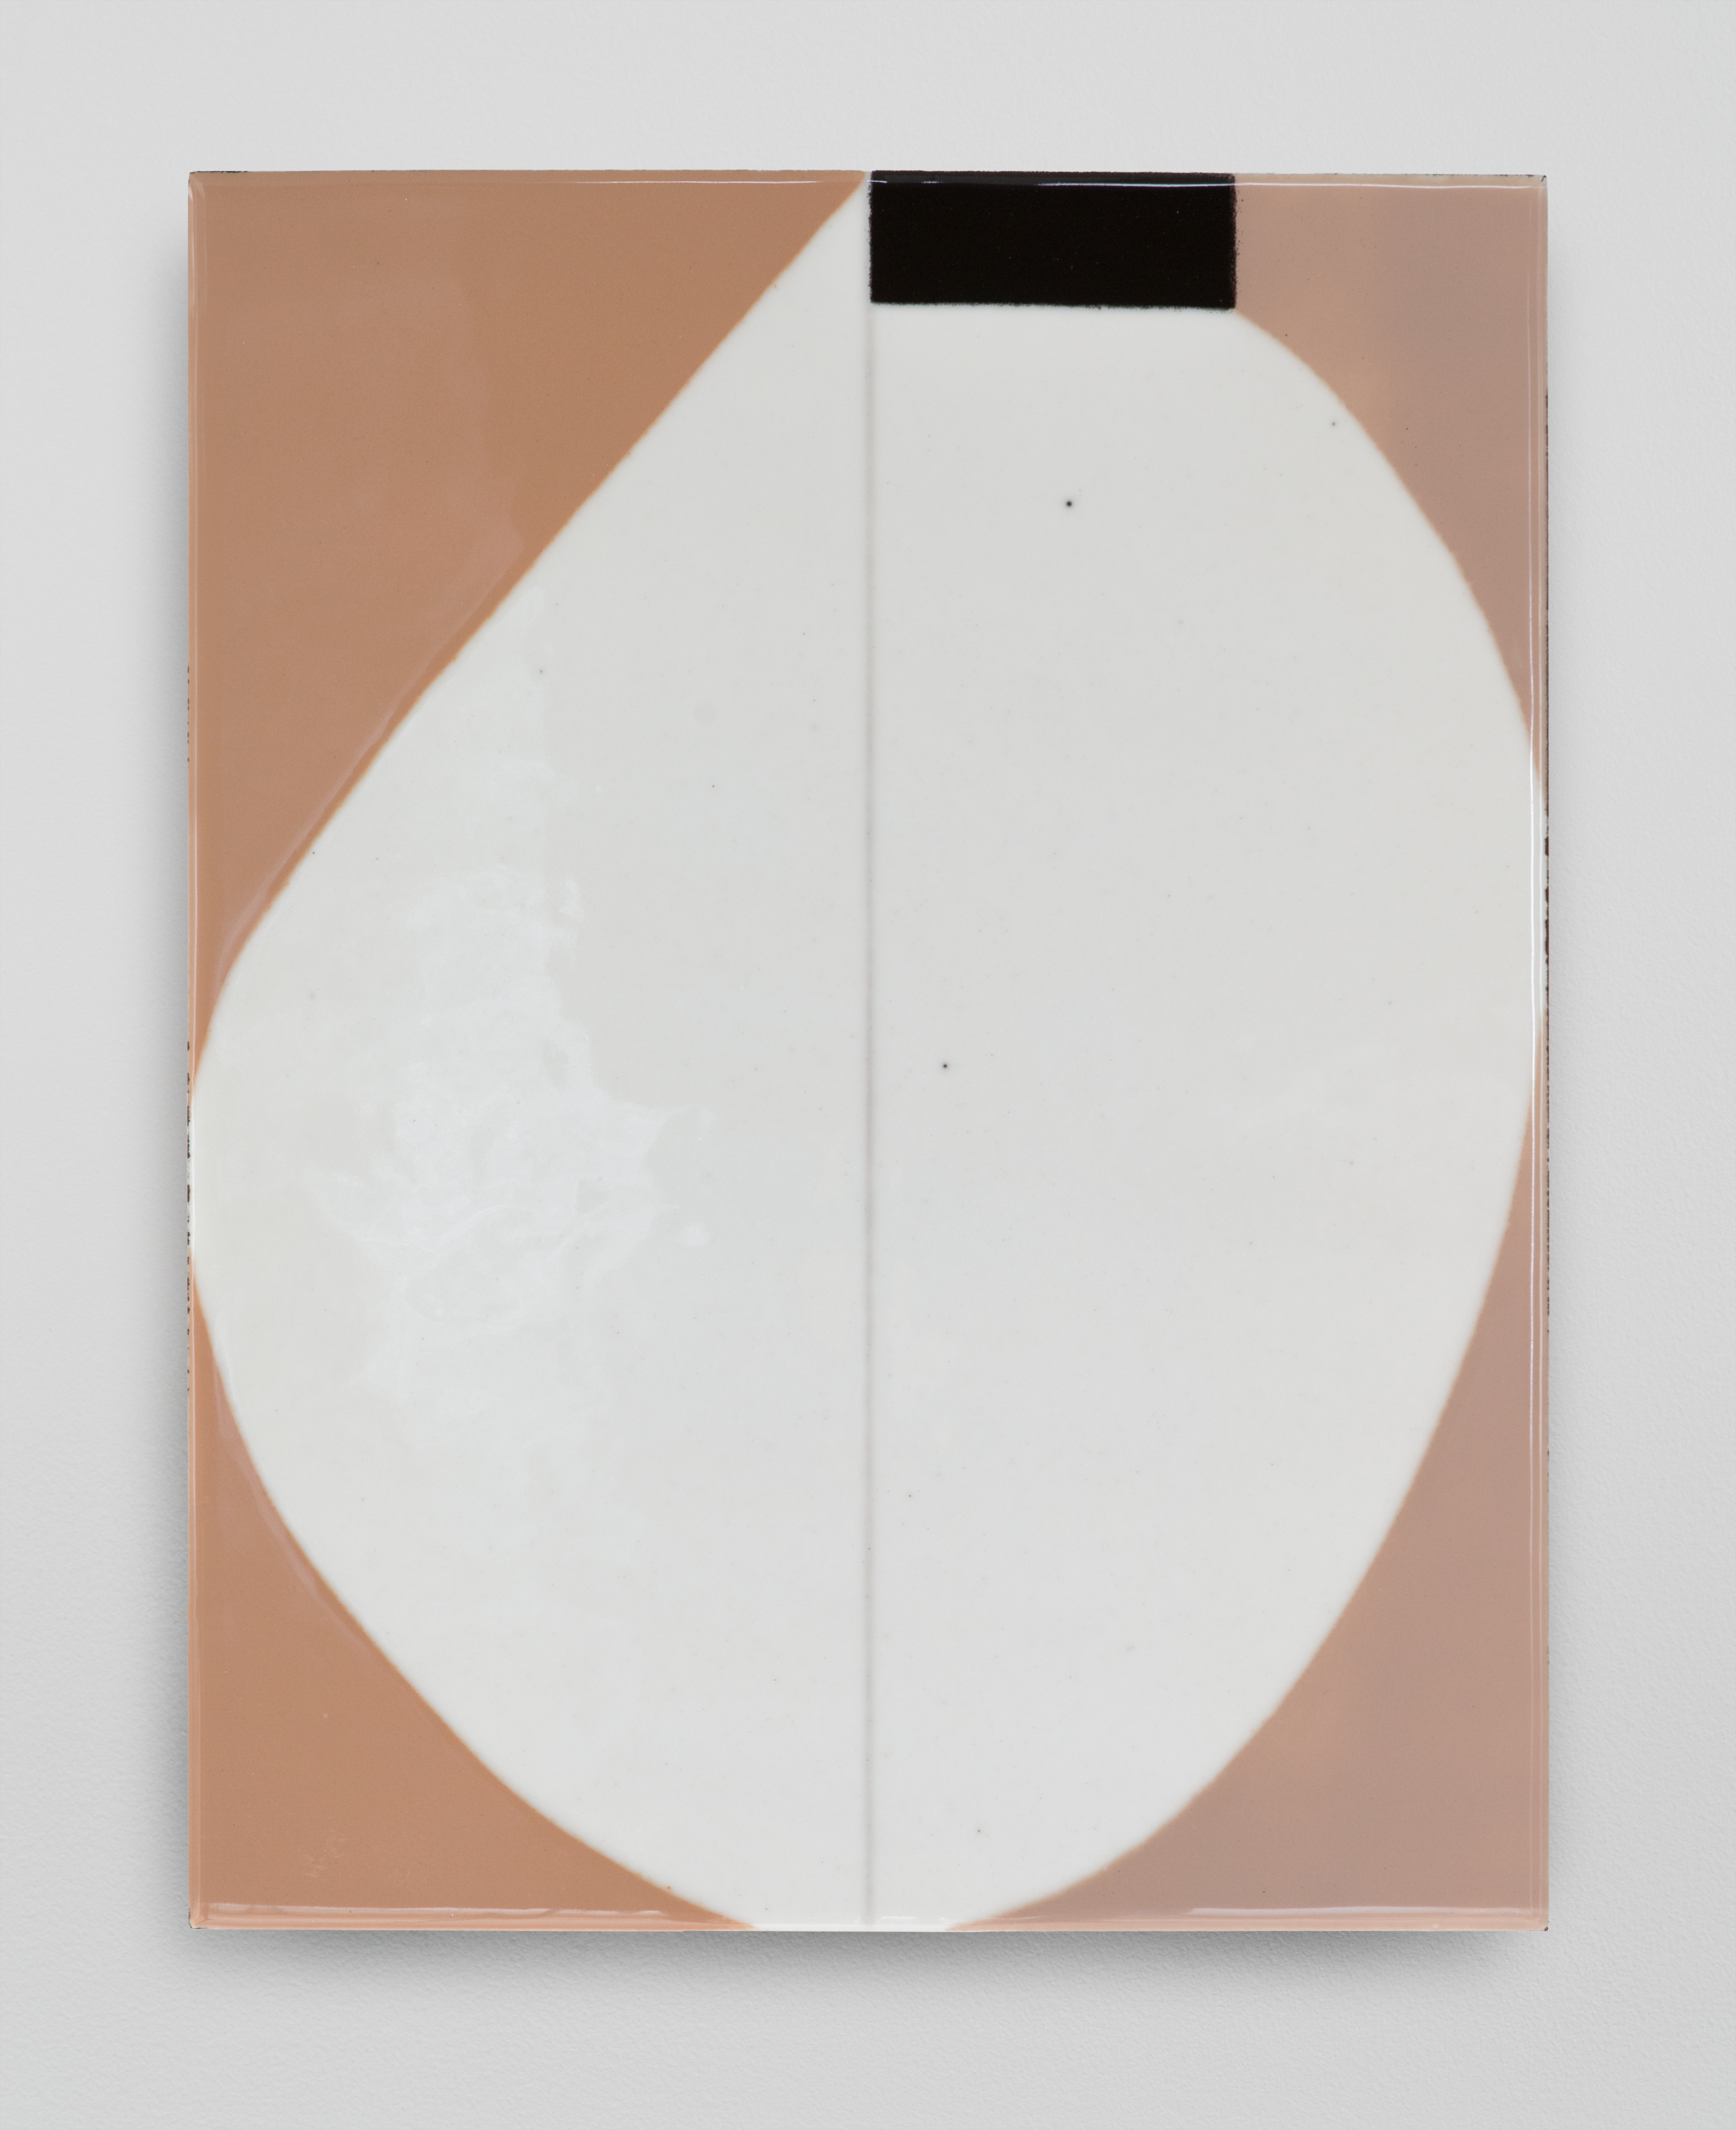 Ulrike Müller, Others, 2015. Vitreous enamel on steel, 15.5 x 12 in. Courtesy of the artis